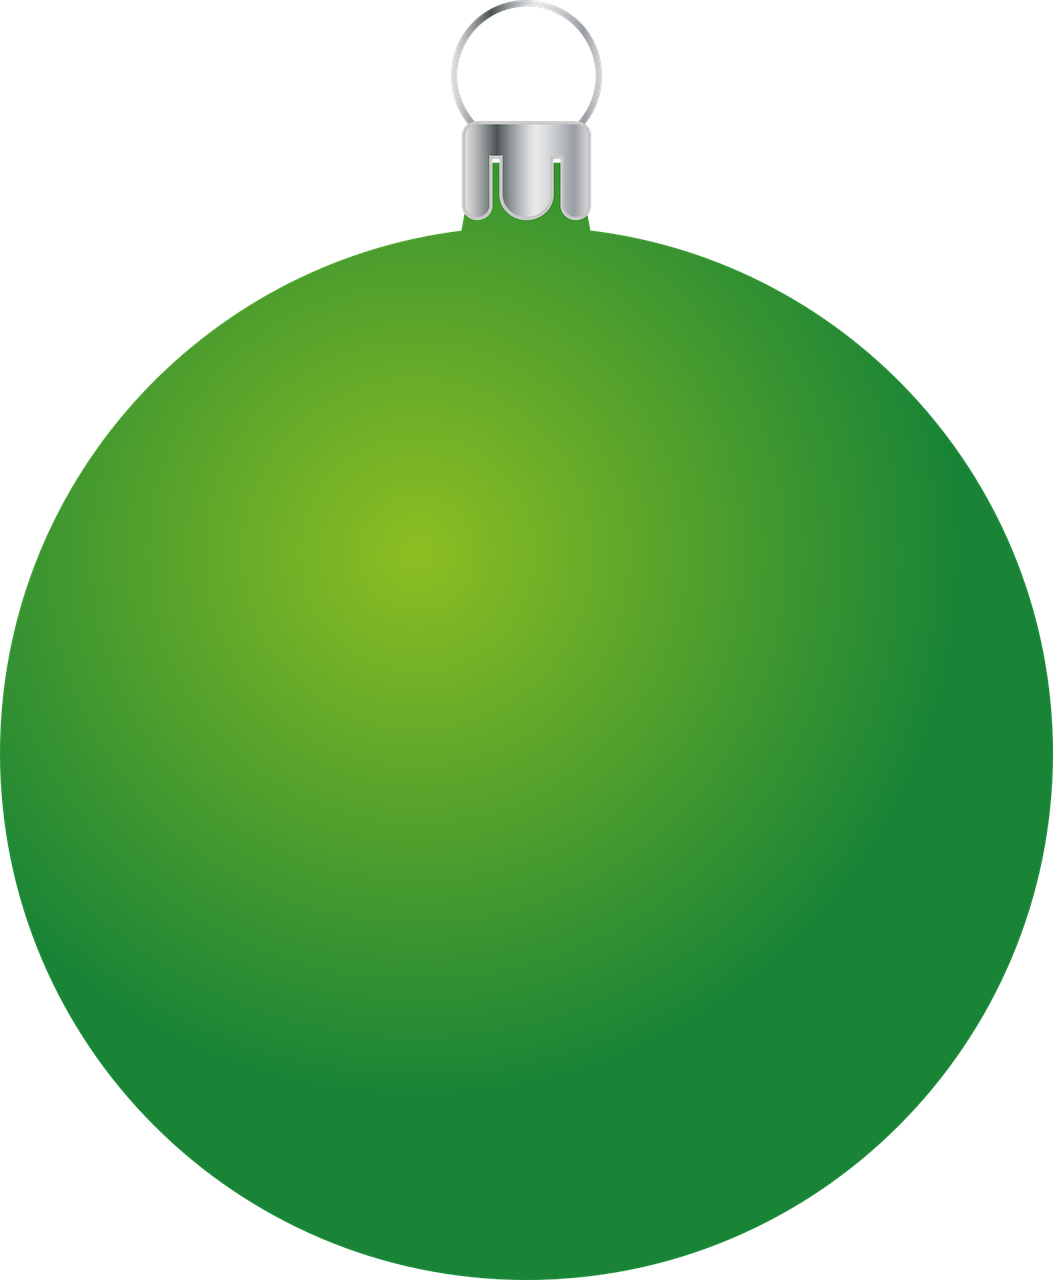 Green Christmas Bauble PNG Clipart